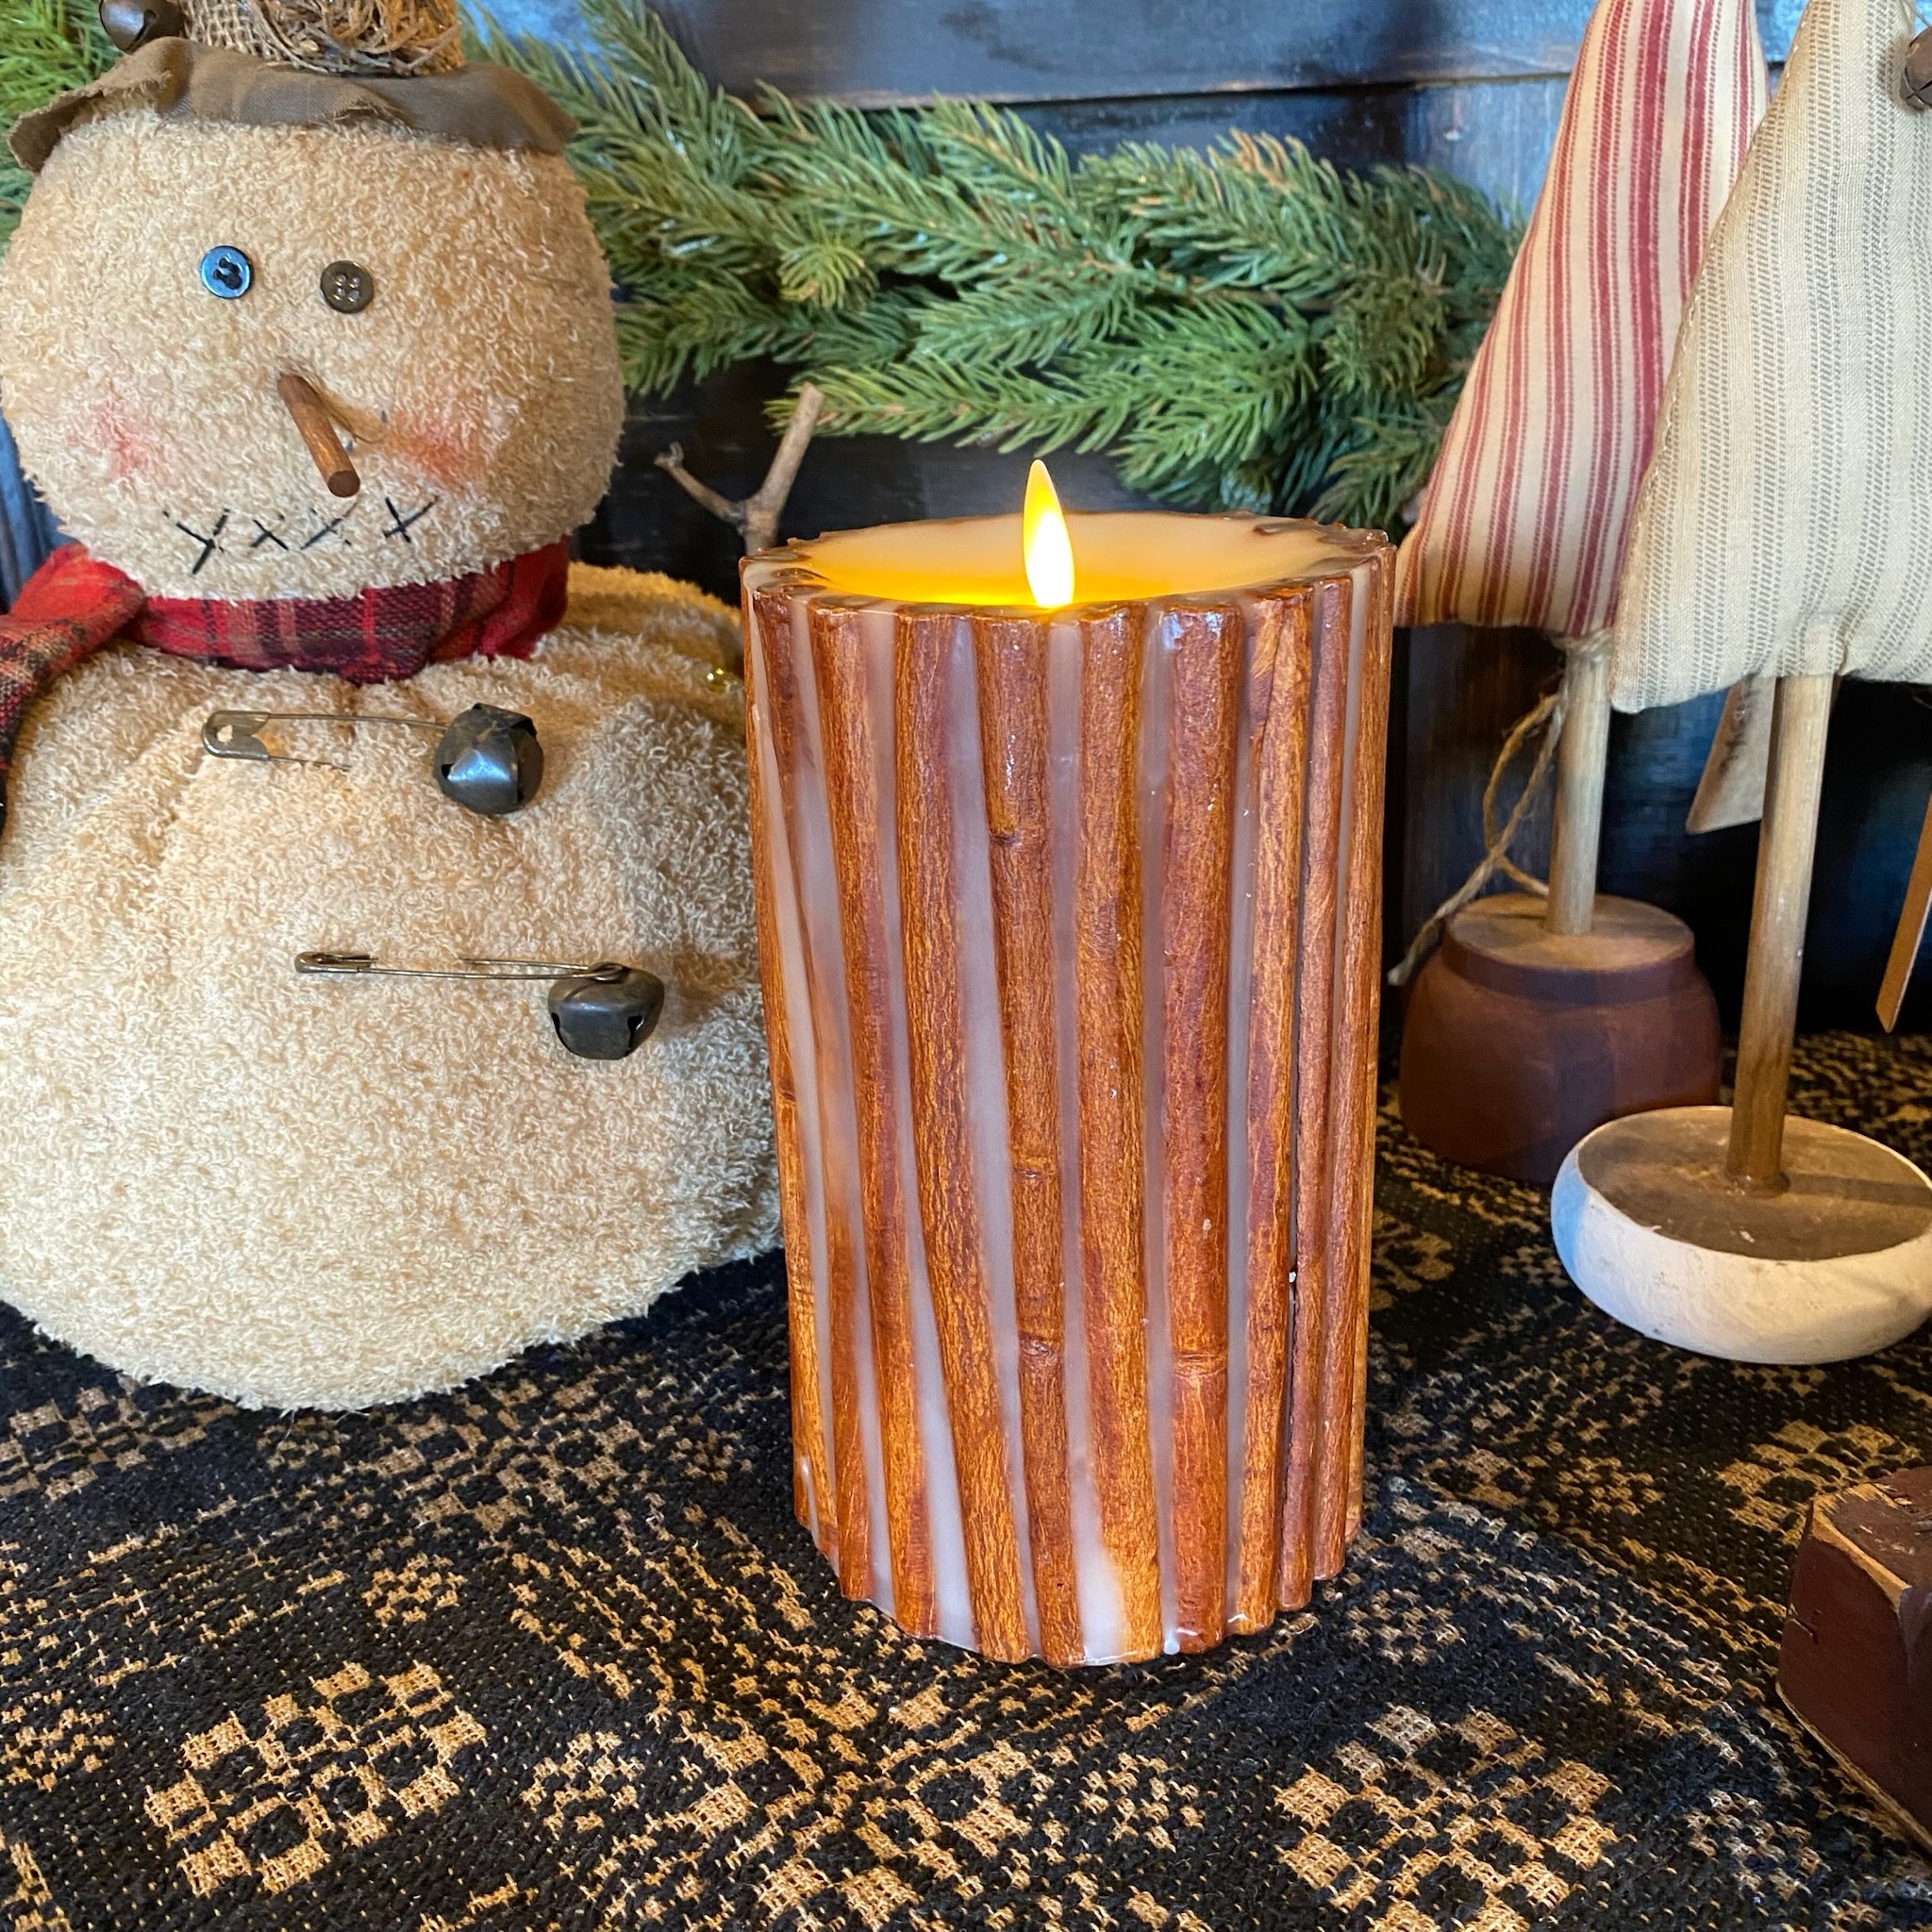 cinnamon stick flicker flame candle